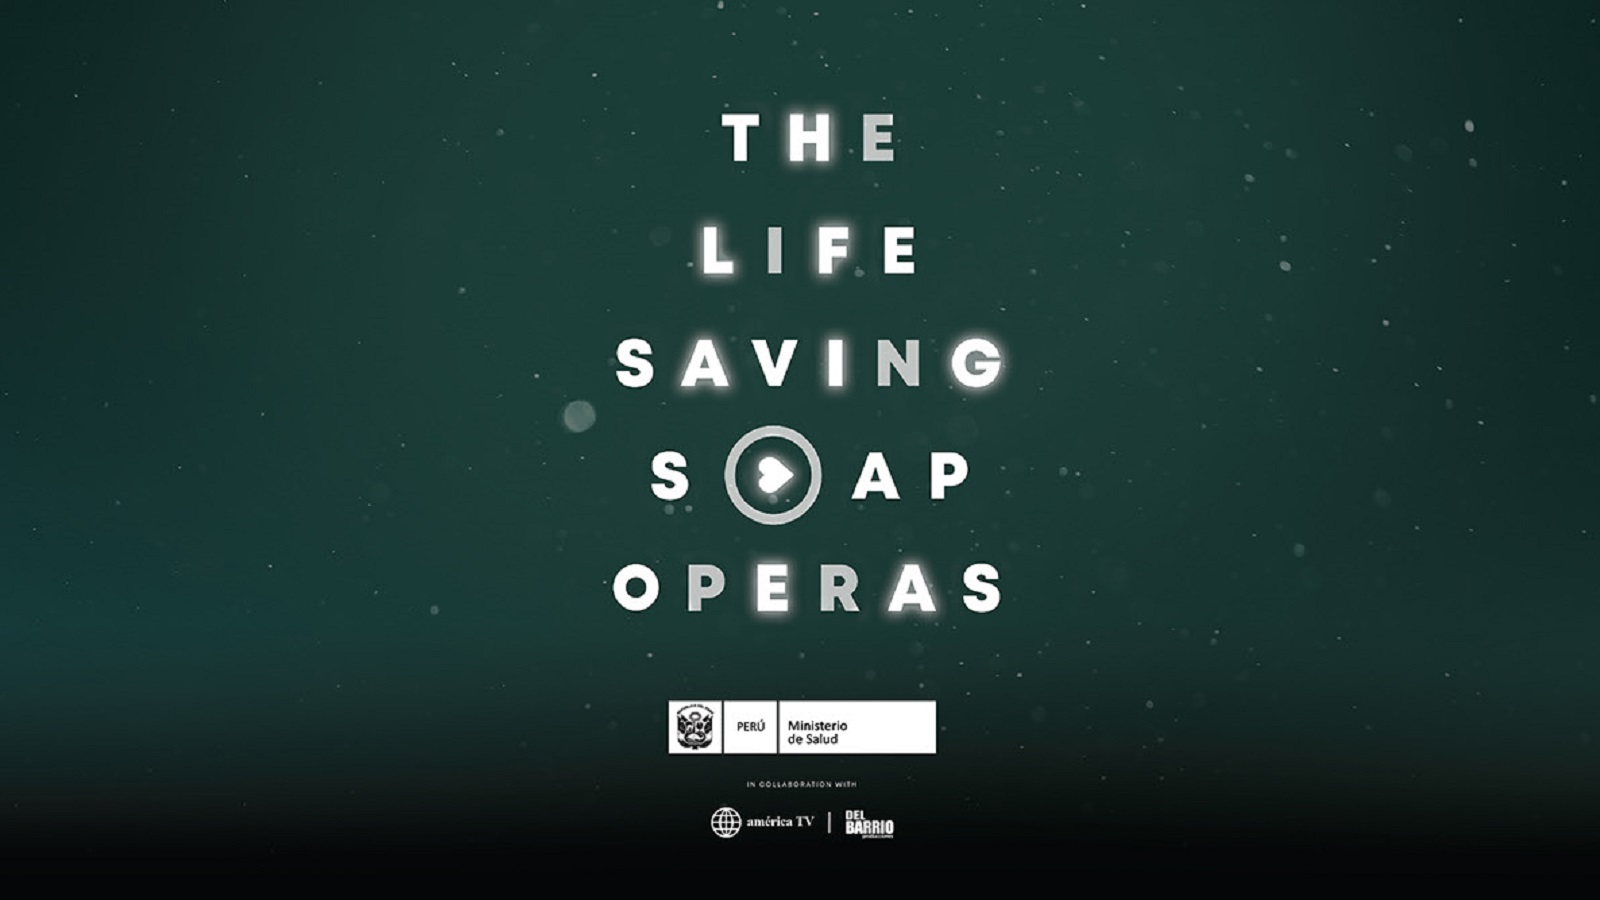 Soap Opera Character Gets Saved by Fictitious Organ Donation